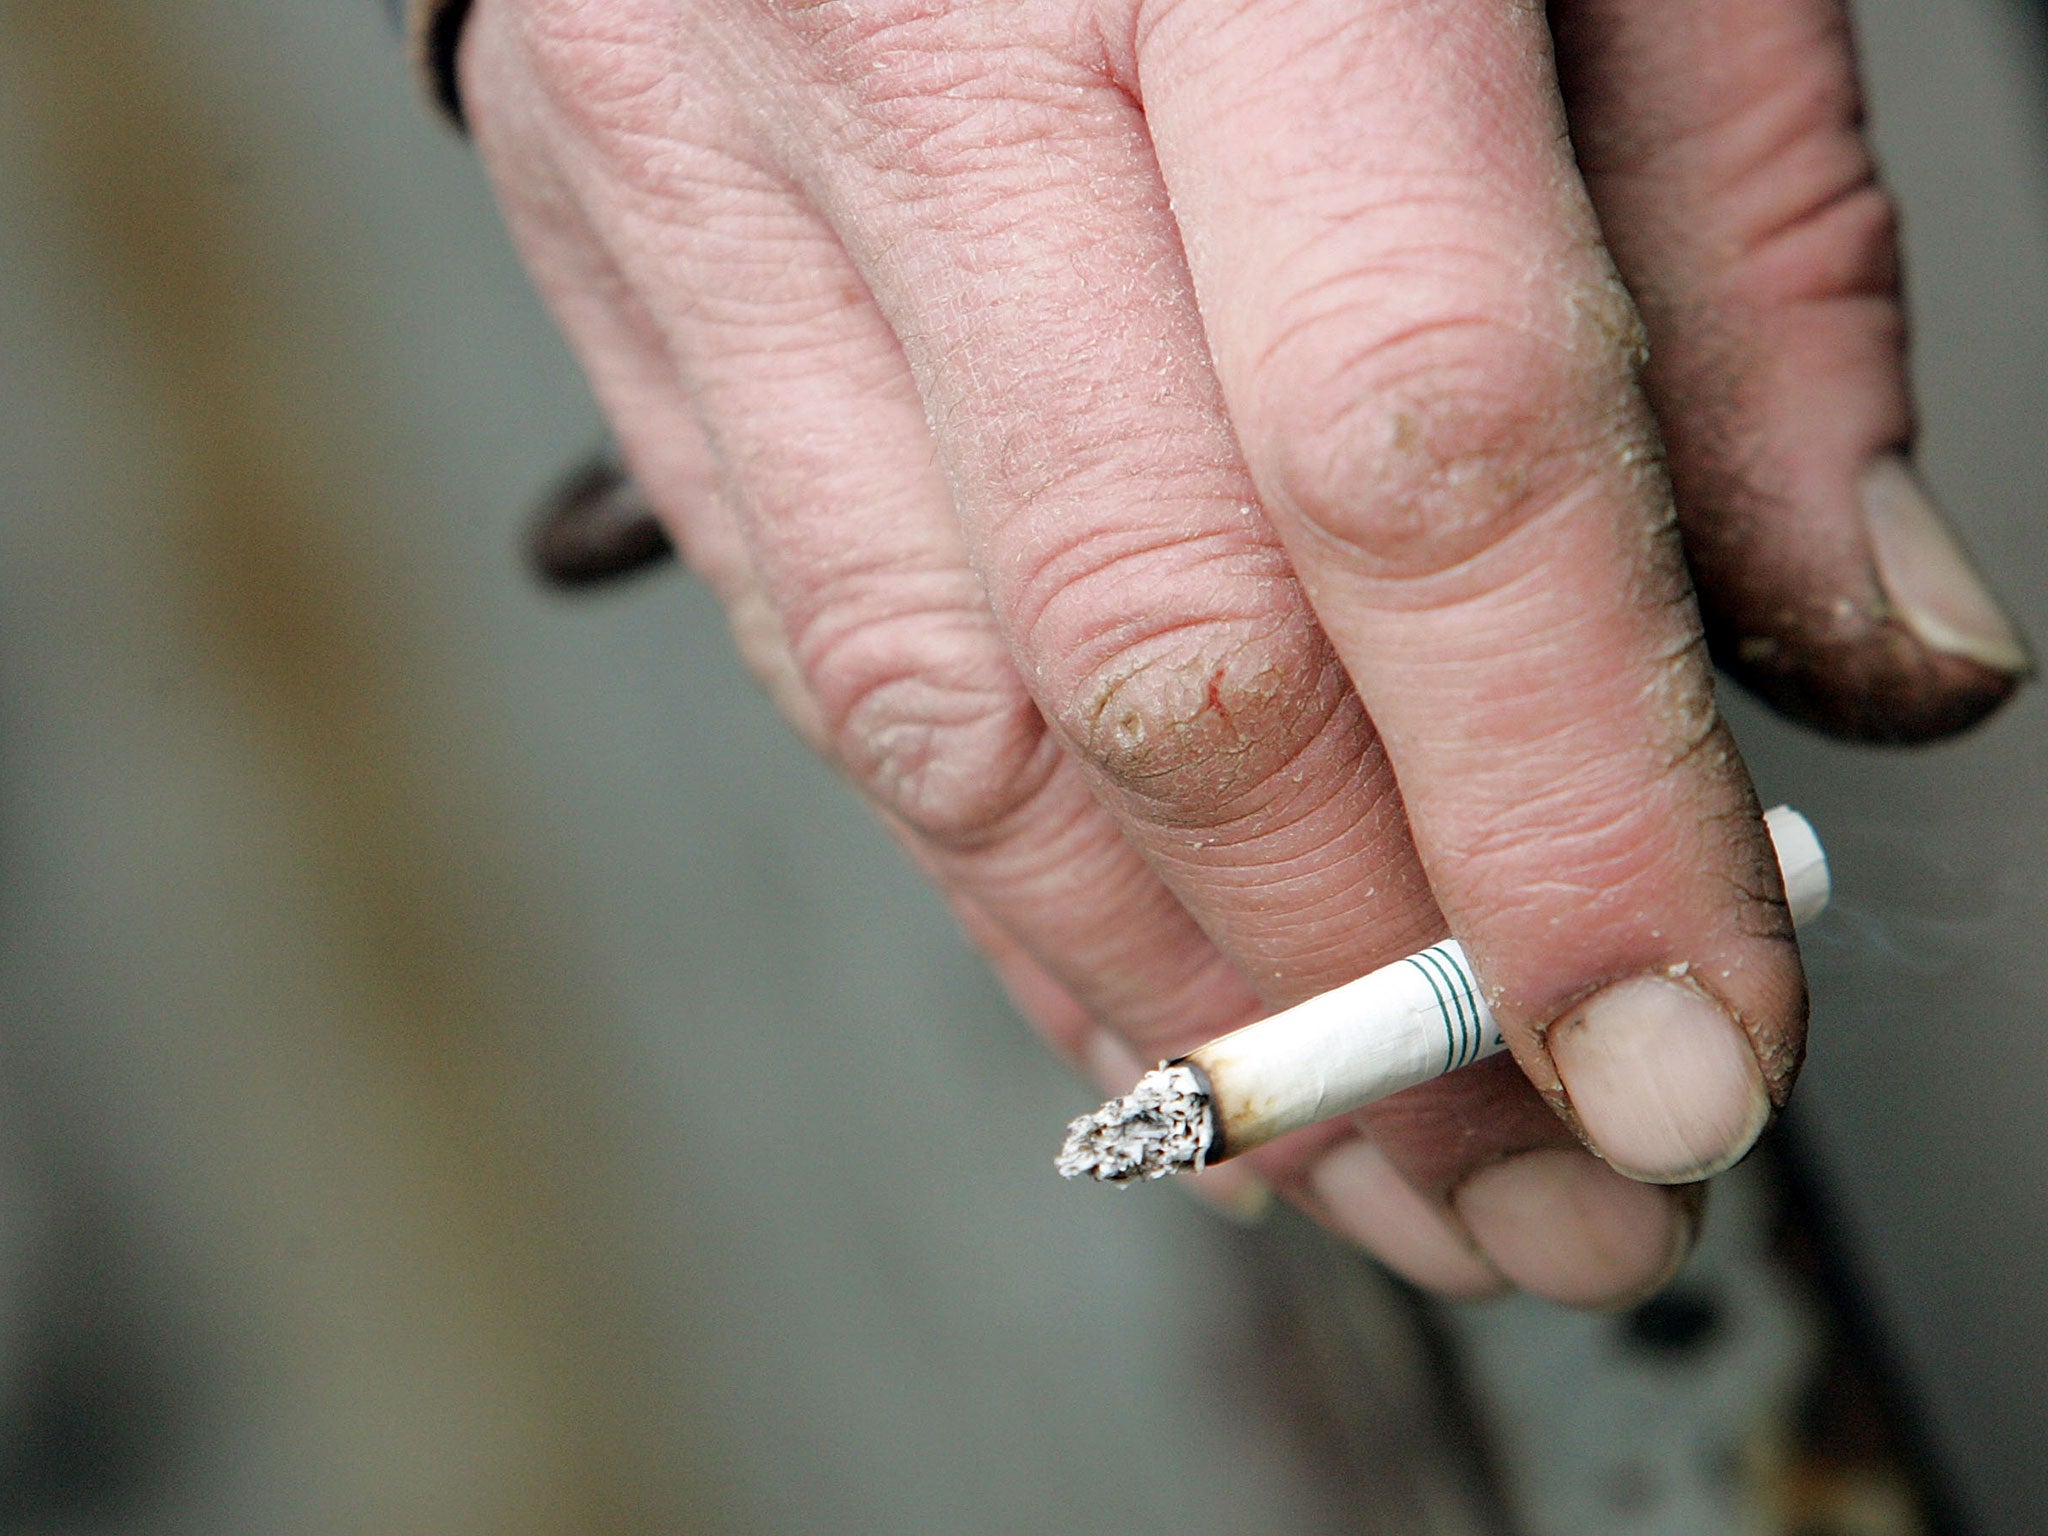 According to new research, parents who smoke are plunging nearly half a million children into poverty